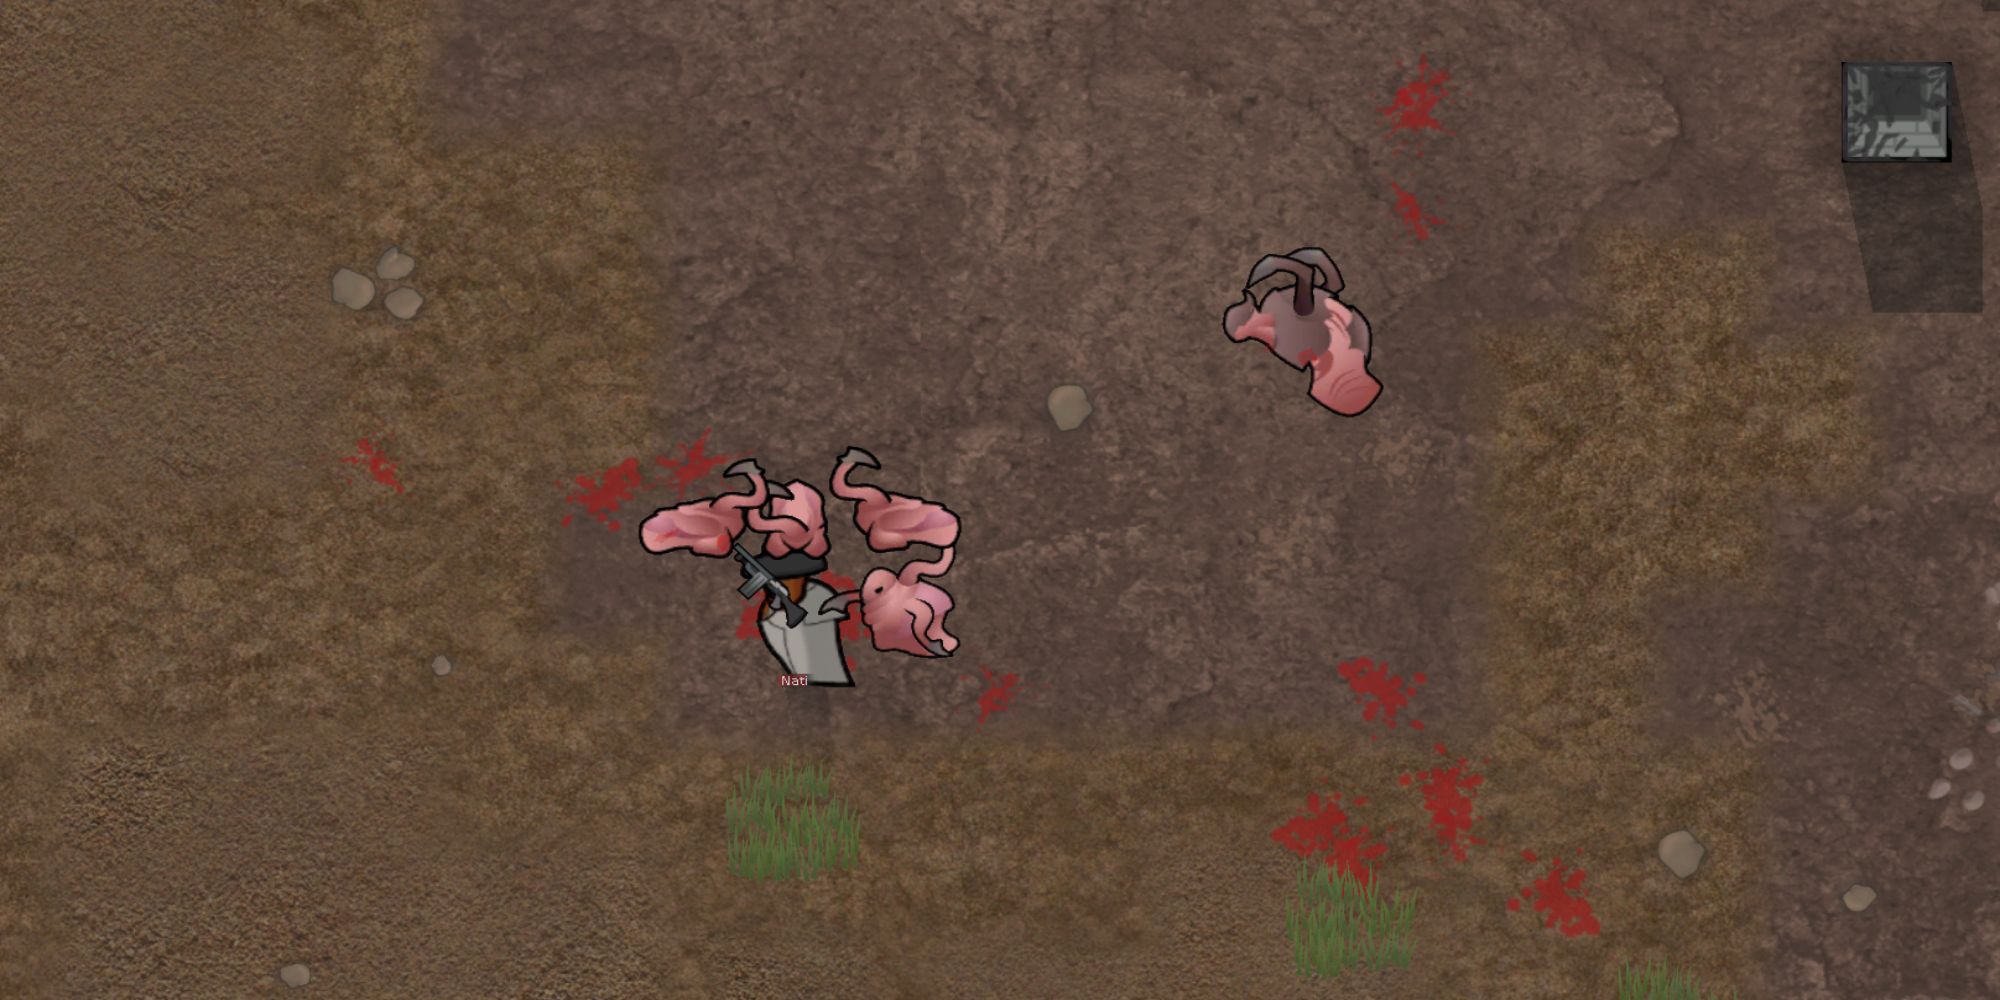 Fingerspikes, Trispikes, and Toughspikes attacking a colonist